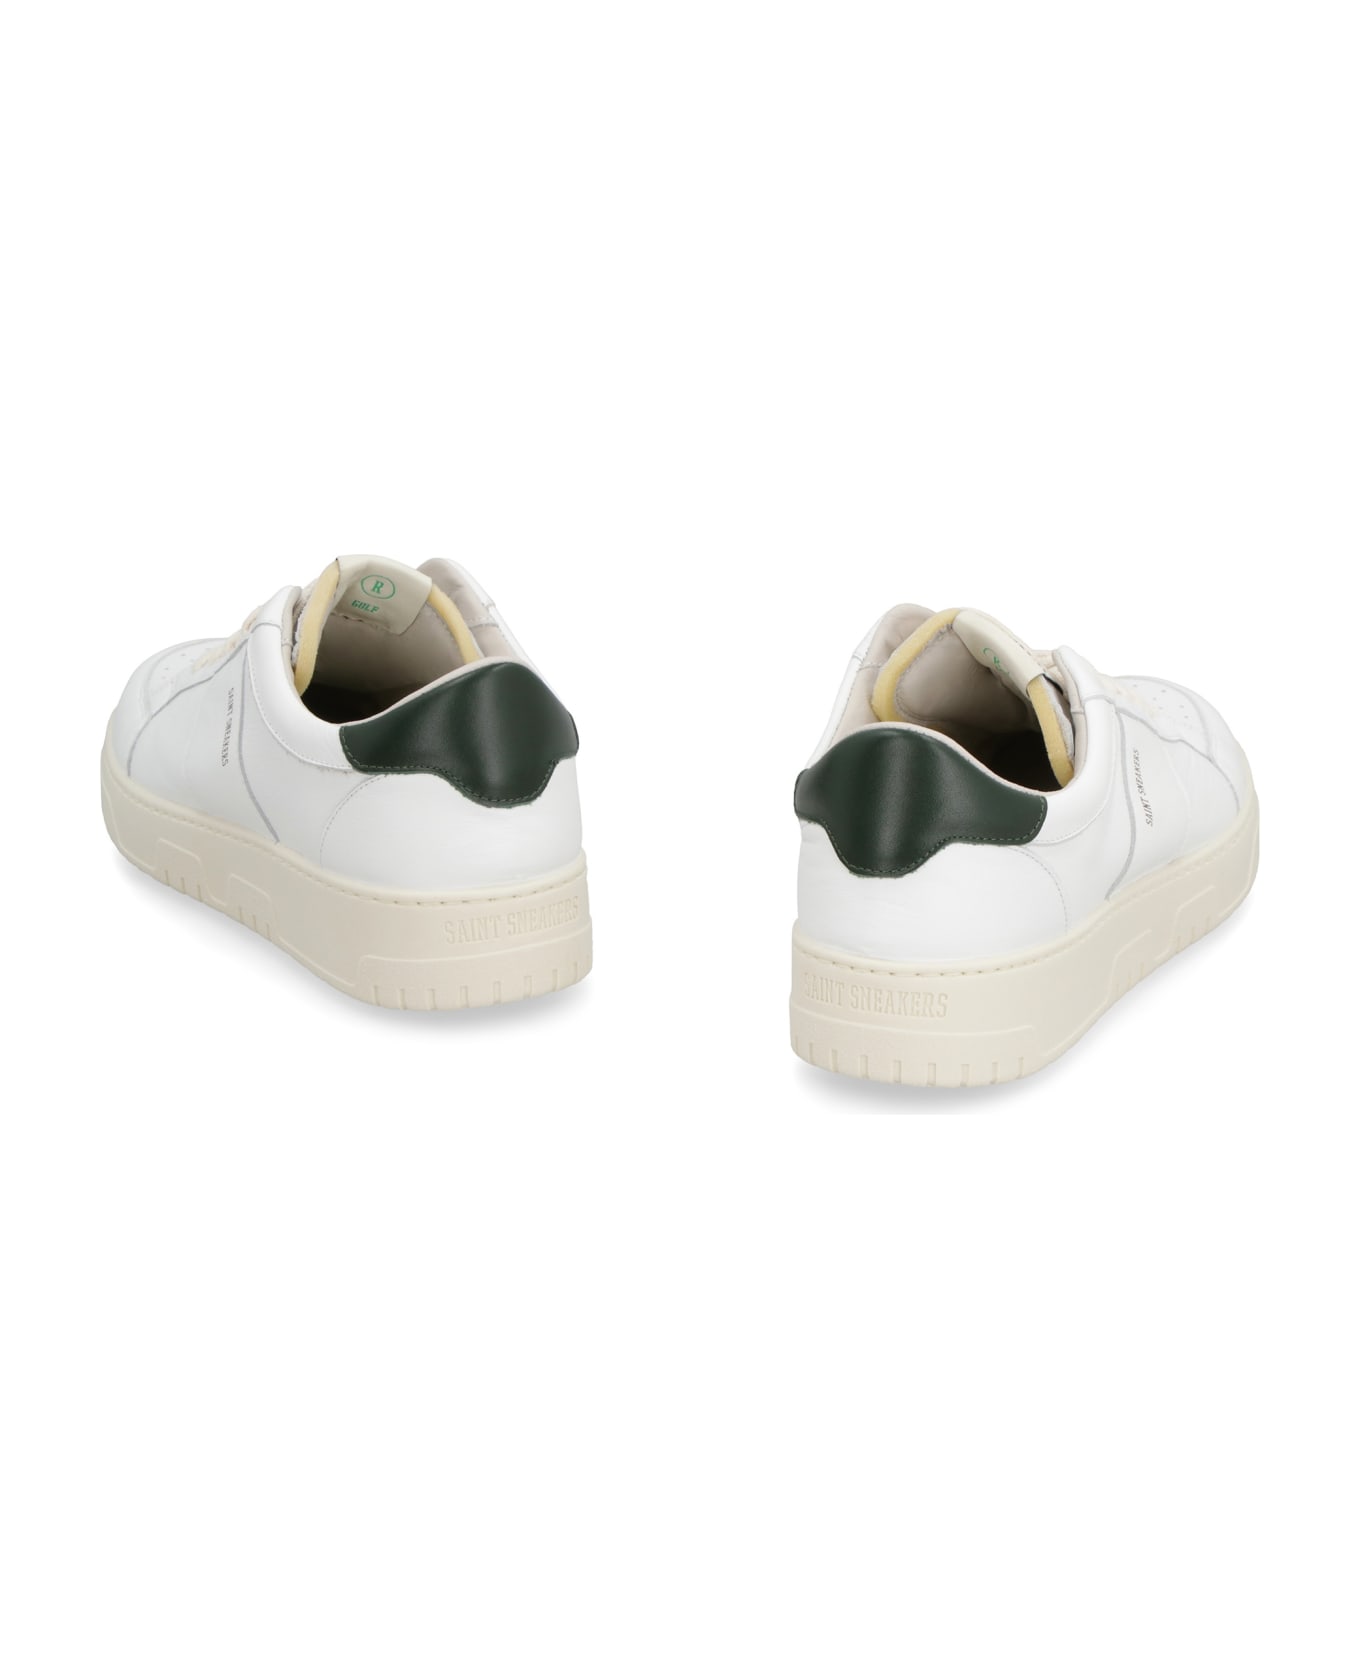 Saint Sneakers Golf Leather Low-top Sneakers - White/green スニーカー